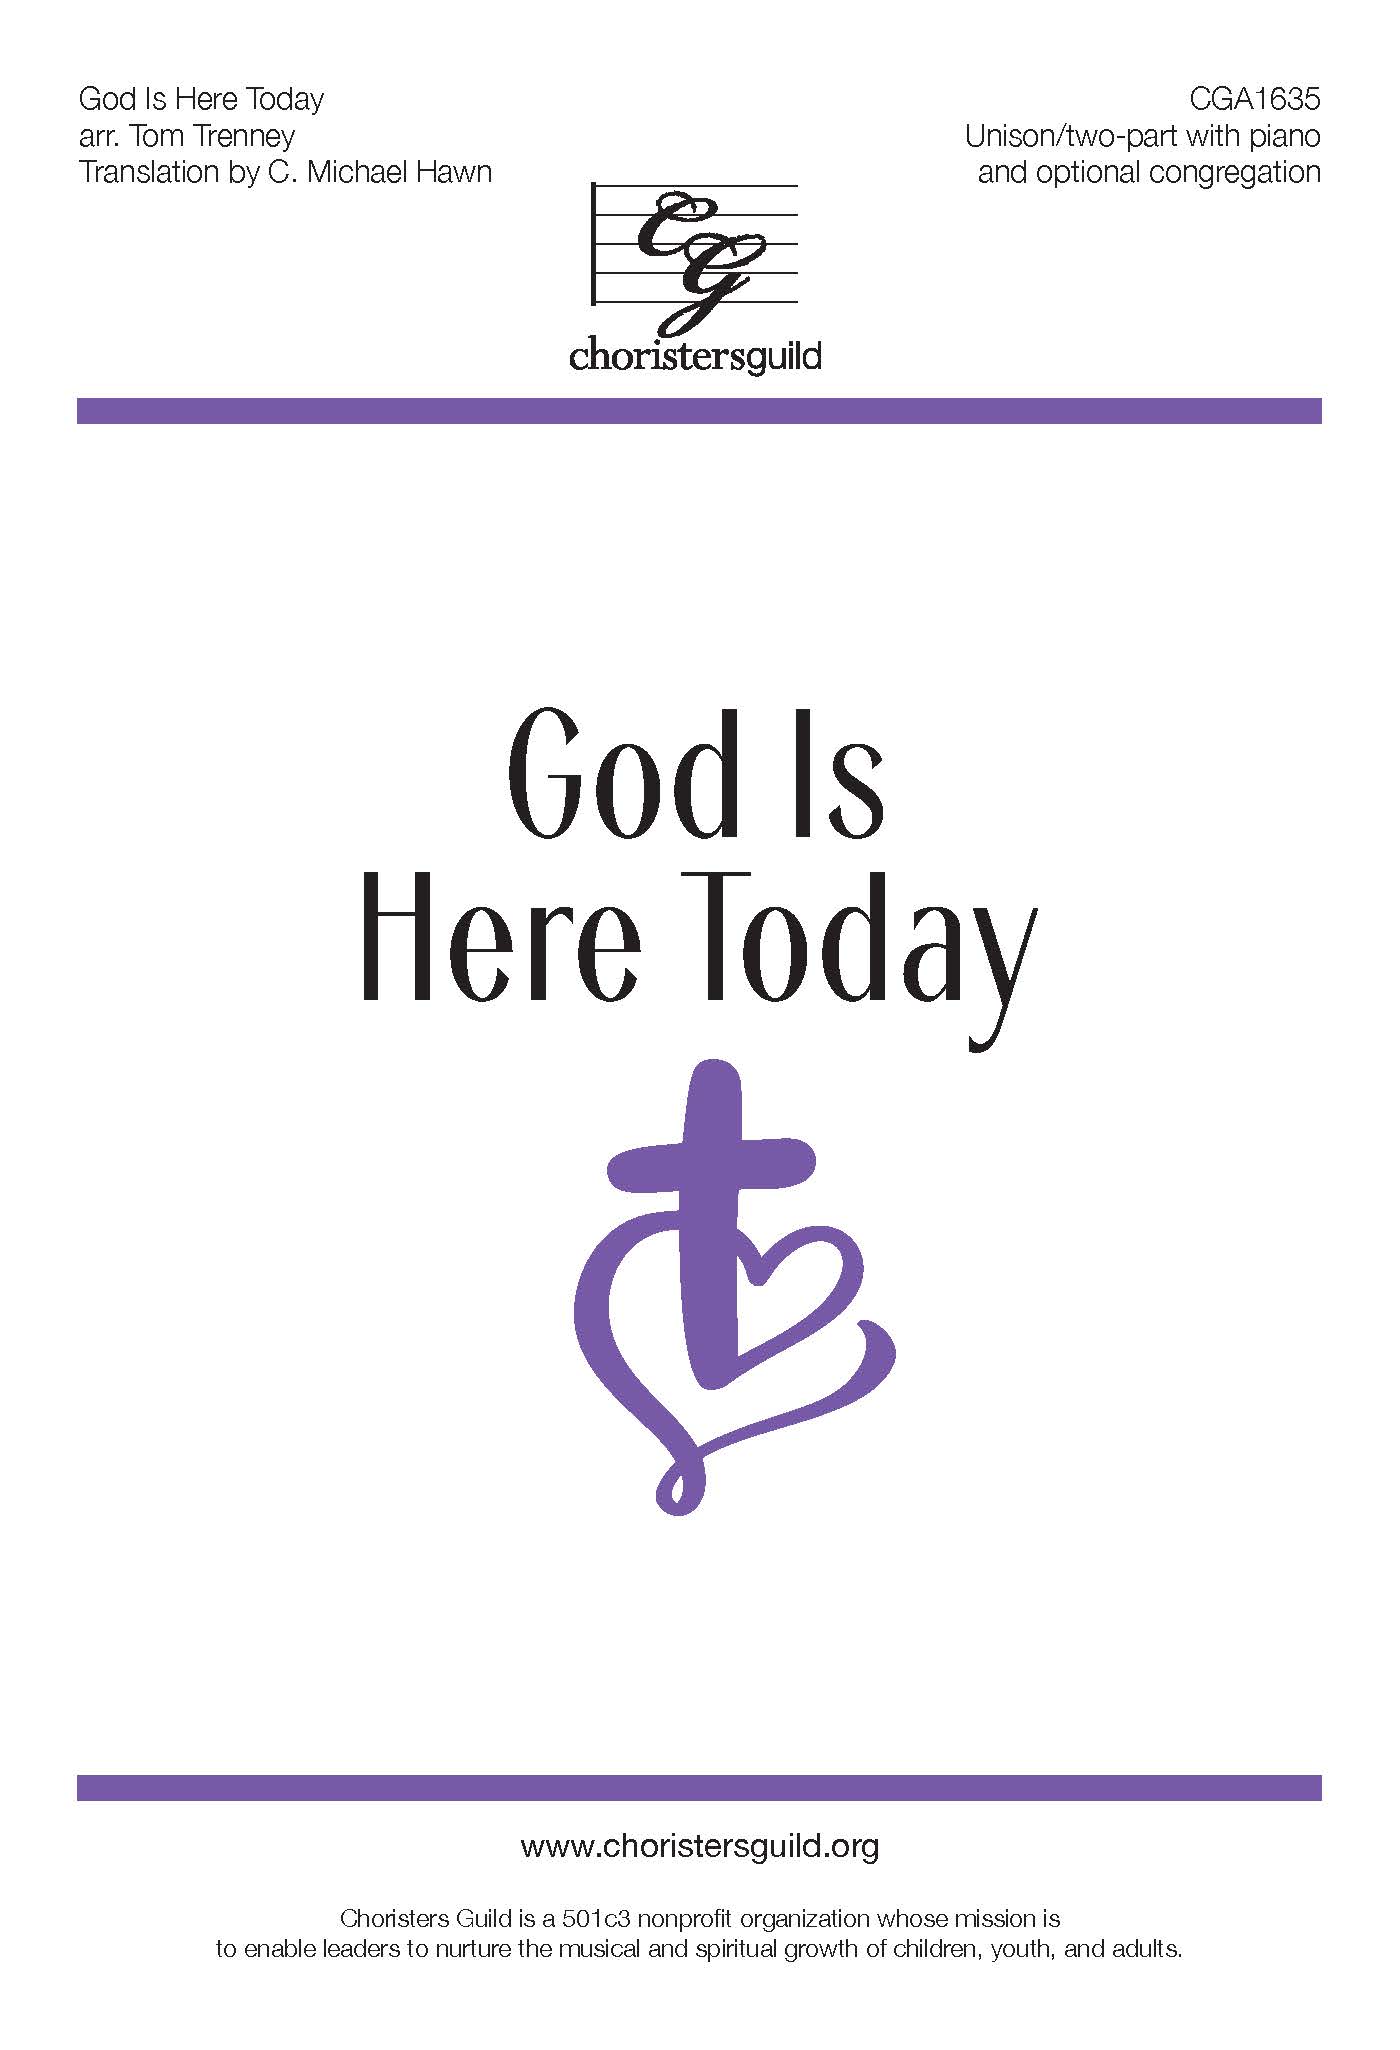 God Is Here Today - Unison/Two-part